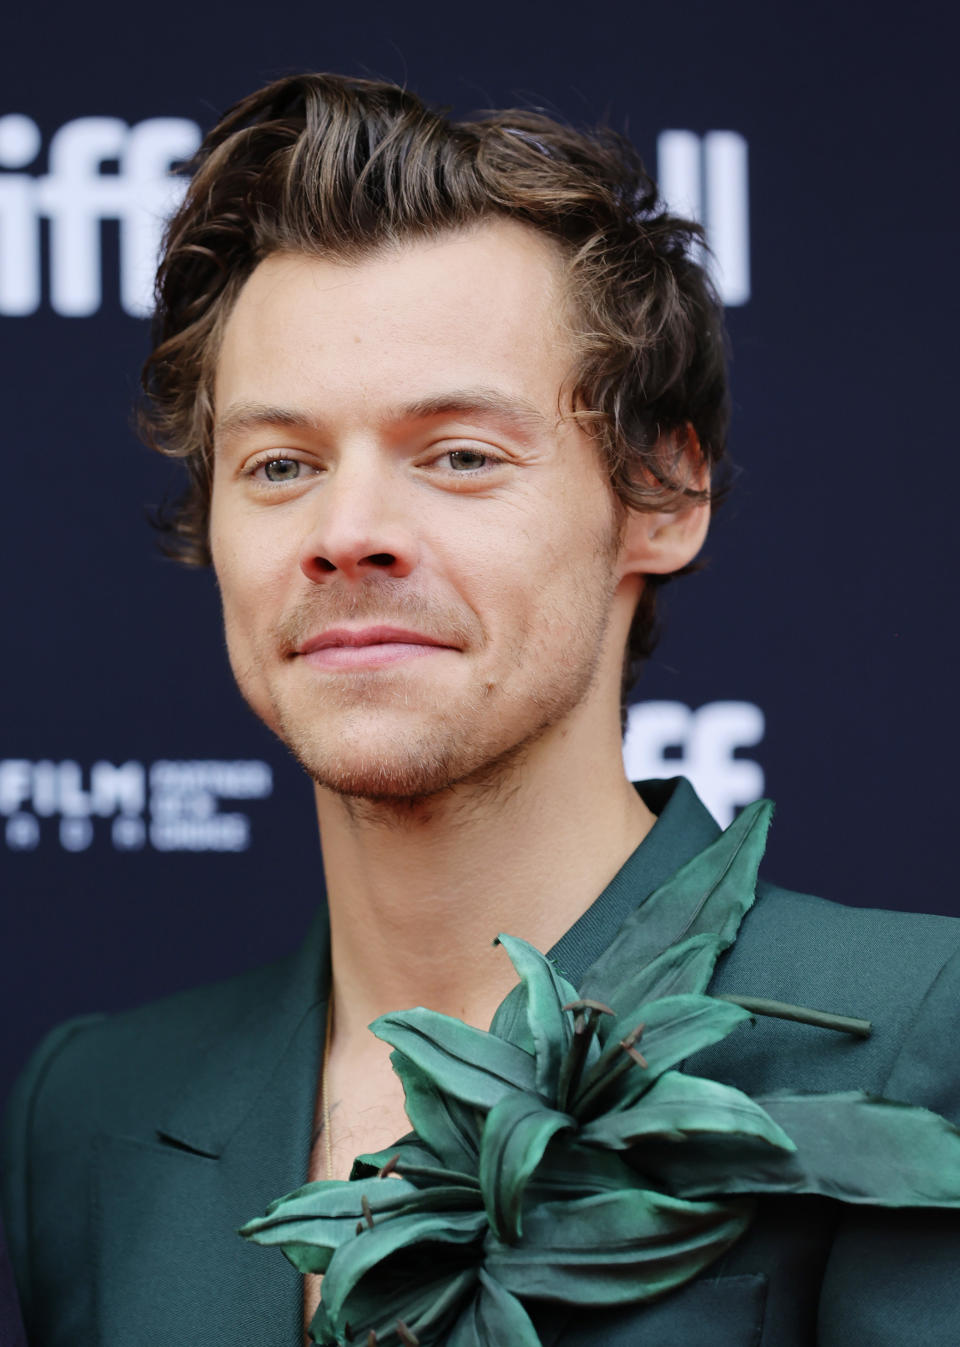 Close-up of Harry wearing a large corsage pin